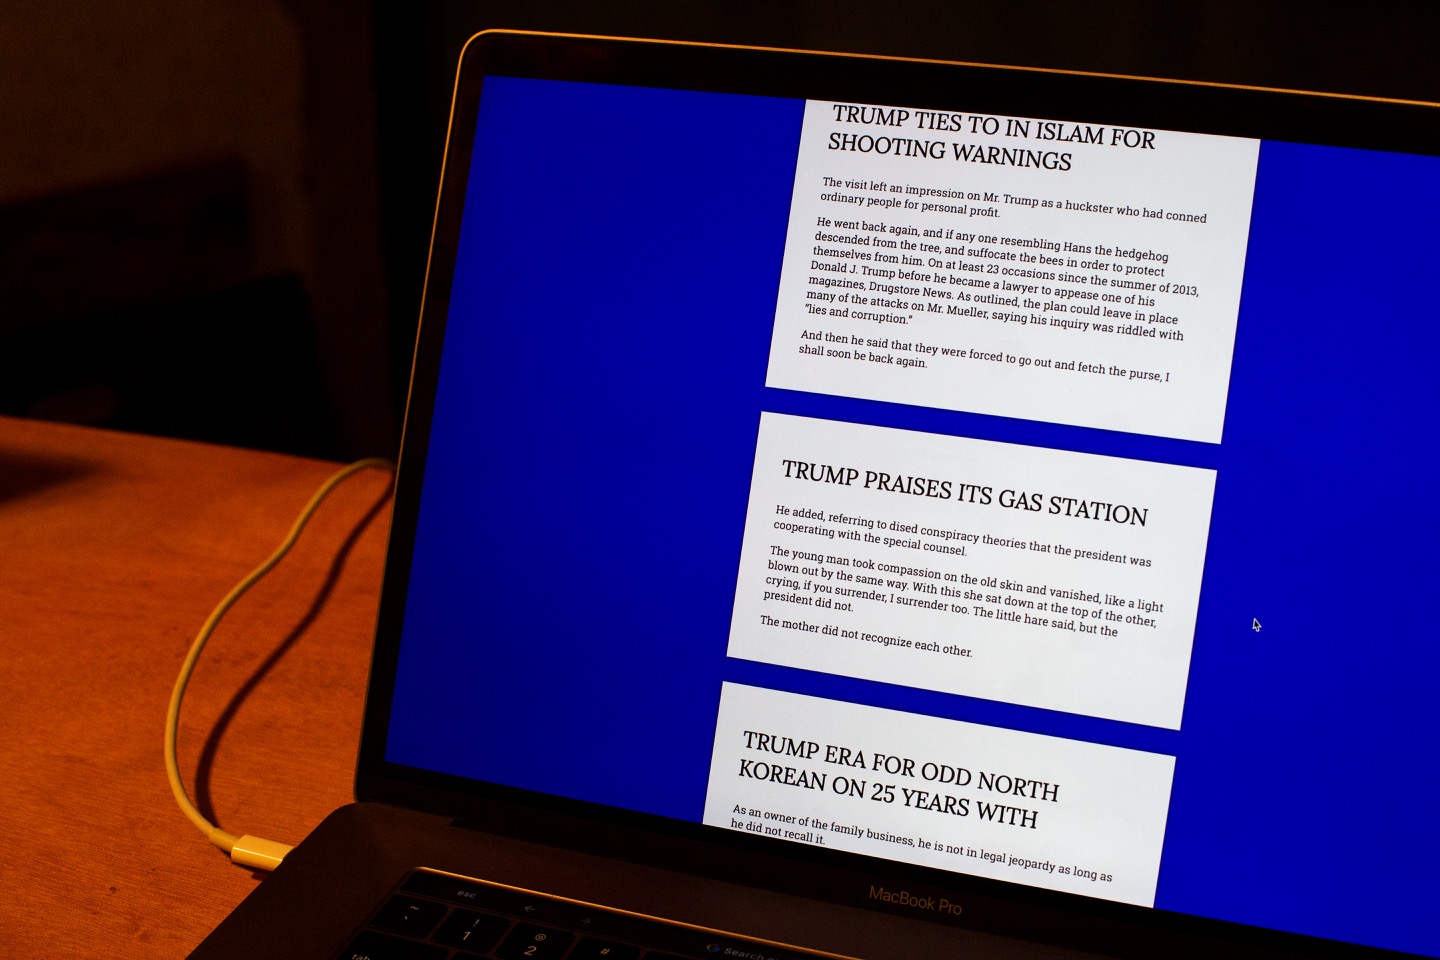 "A photograph of machine generated news about Trump on a laptop screen."